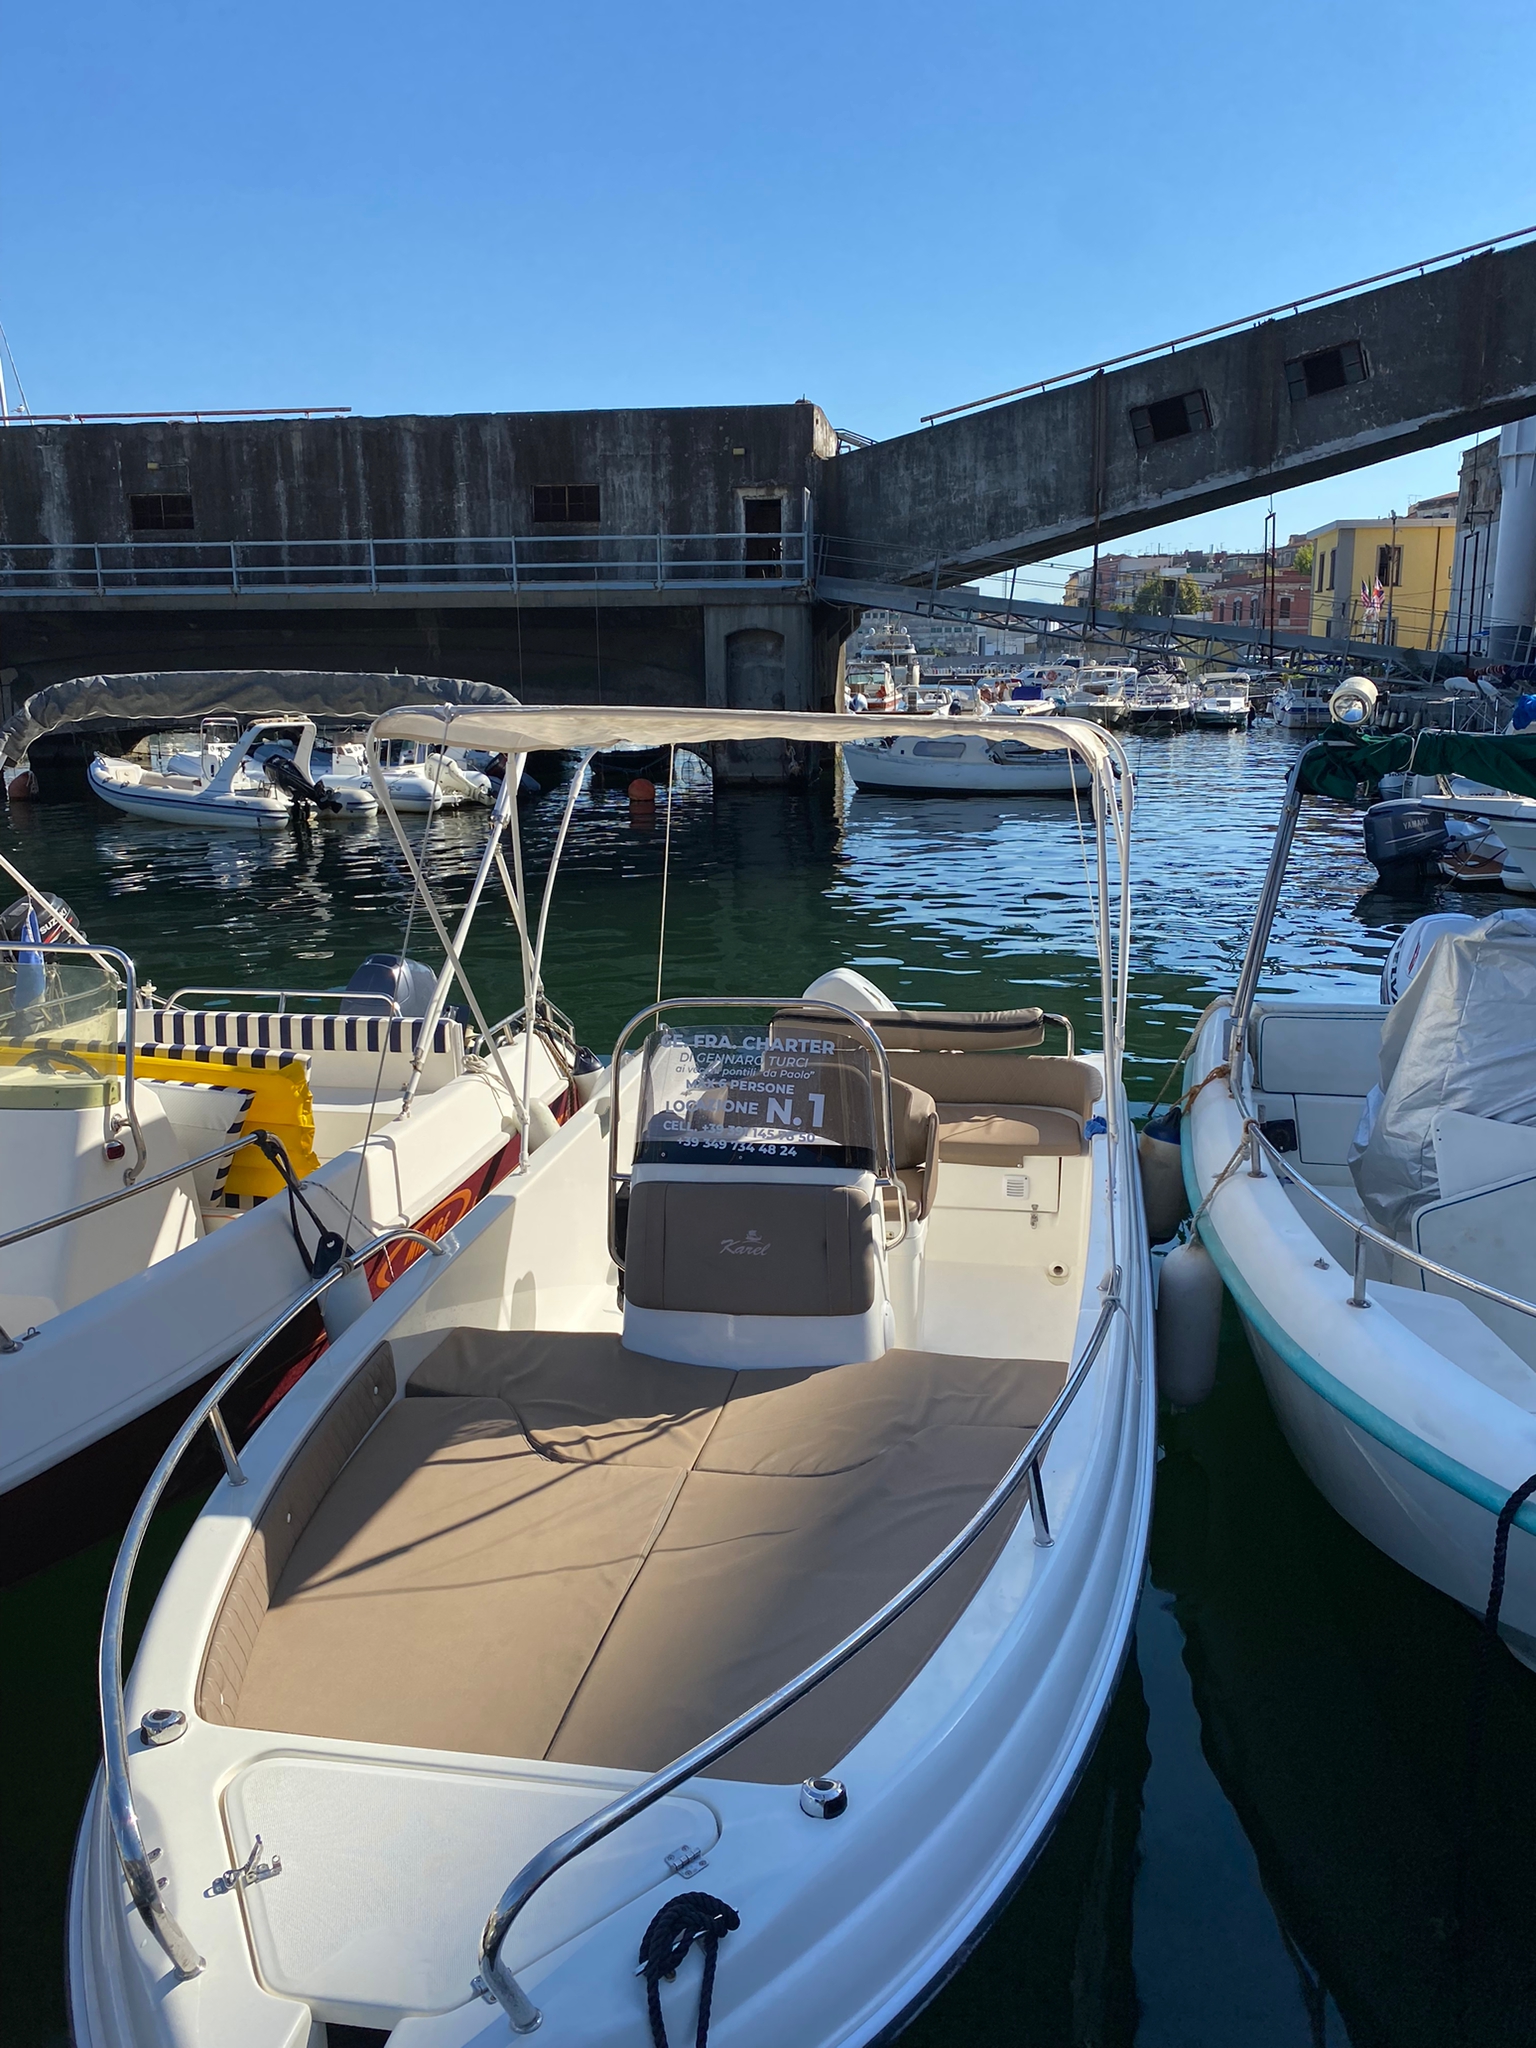 Ithaca 550 - Yacht Charter Castellammare di Stabia & Boat hire in Italy Campania Bay of Naples Castellammare di Stabia Porto di Castellammare di Stabia 2